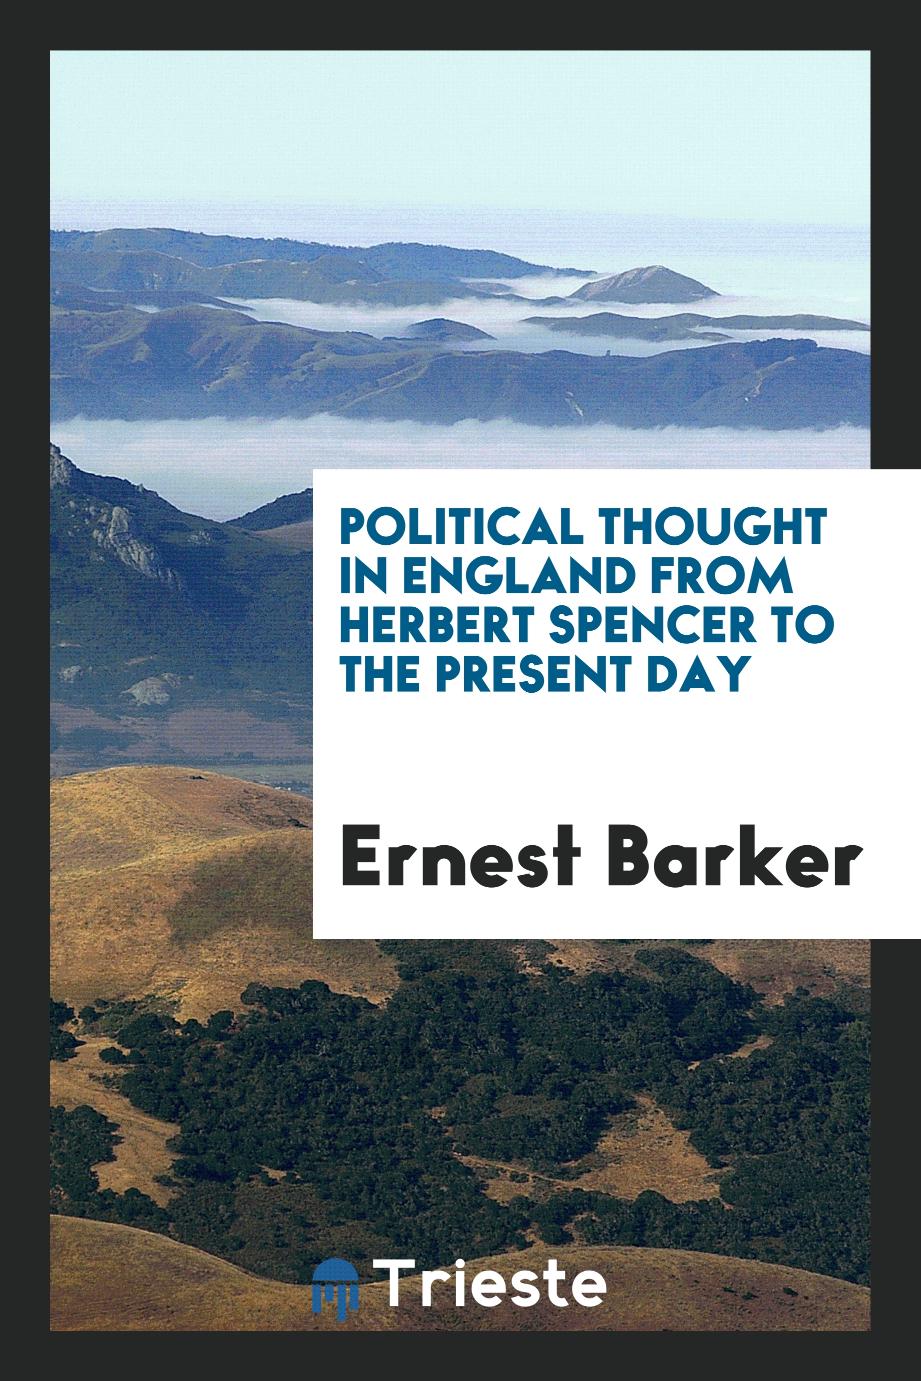 Political thought in England from Herbert Spencer to the present day